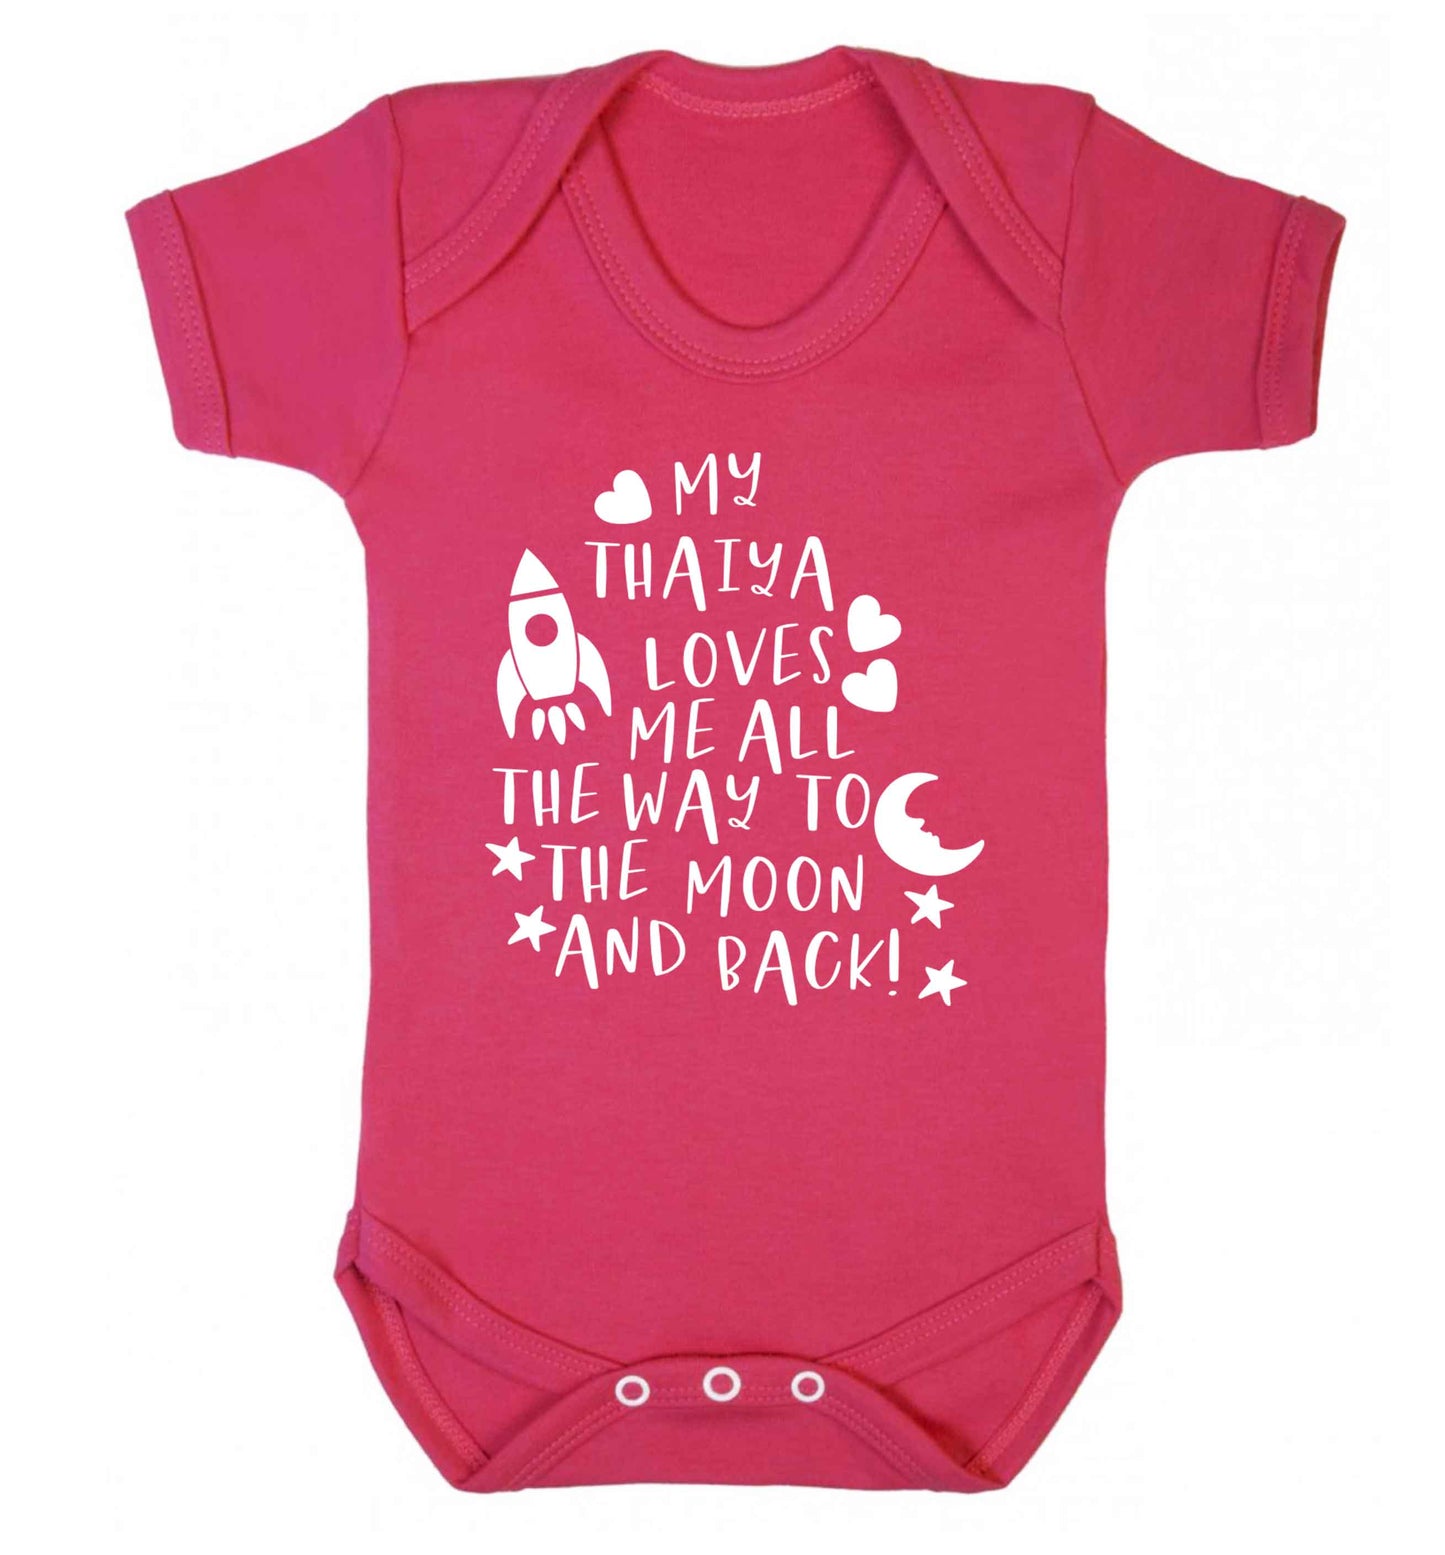 My thaiya loves me all the way to the moon and back Baby Vest dark pink 18-24 months